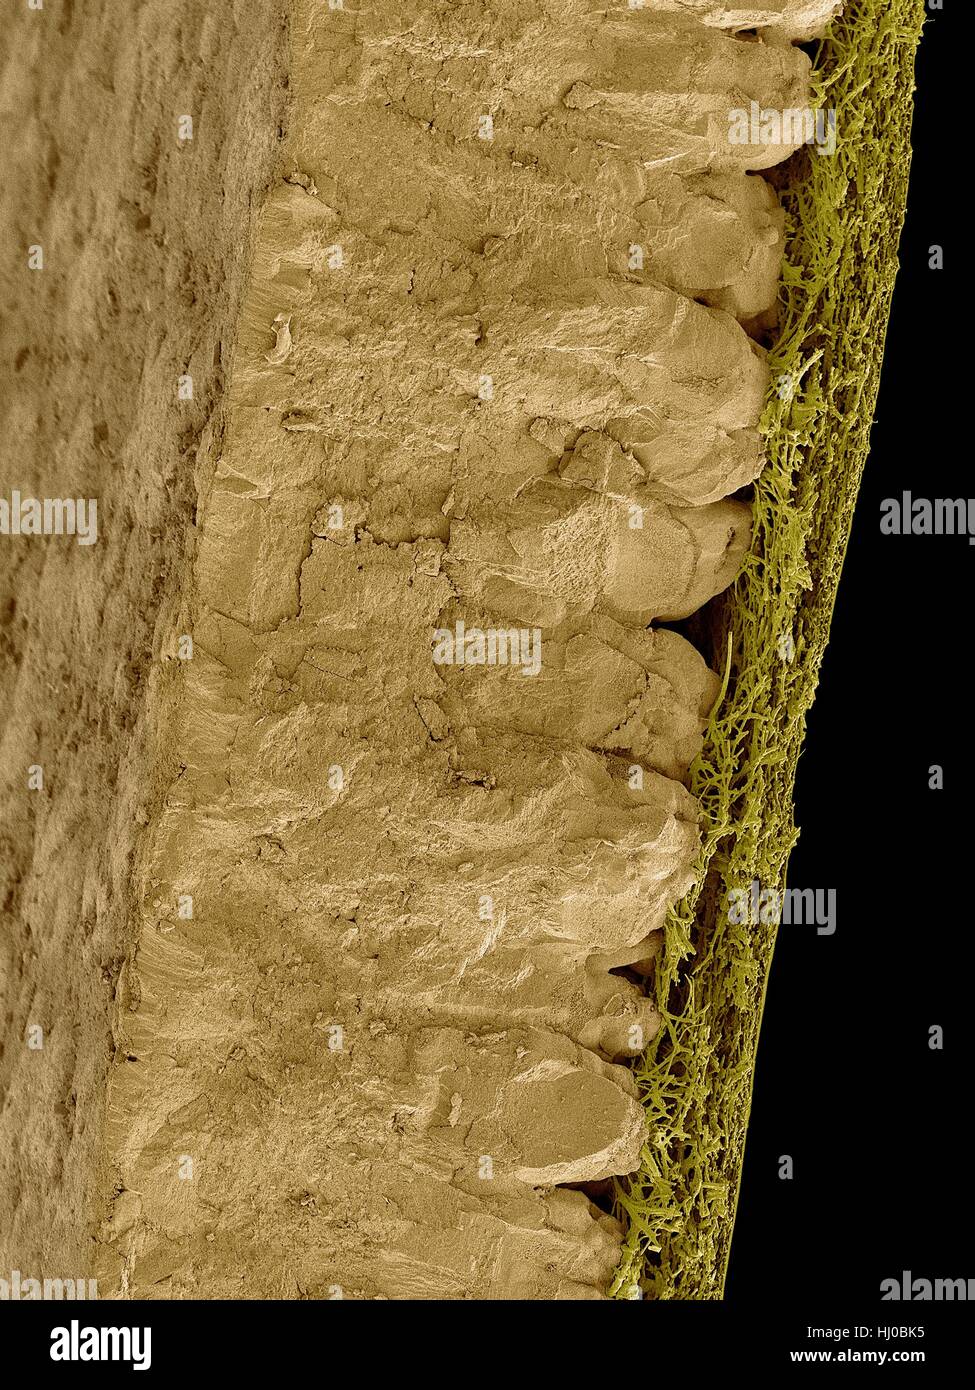 Coloured scanning electron micrograph (SEM) Chicken eggshell cross section (Gallus gallus domesticus).Shown from left to right in image.hard mineralized eggshell inner fibrous membrane.The hard mineralized eggshell contains calcium carbonate (CaCO3) mineral crystals that form many tiny pores in Stock Photo